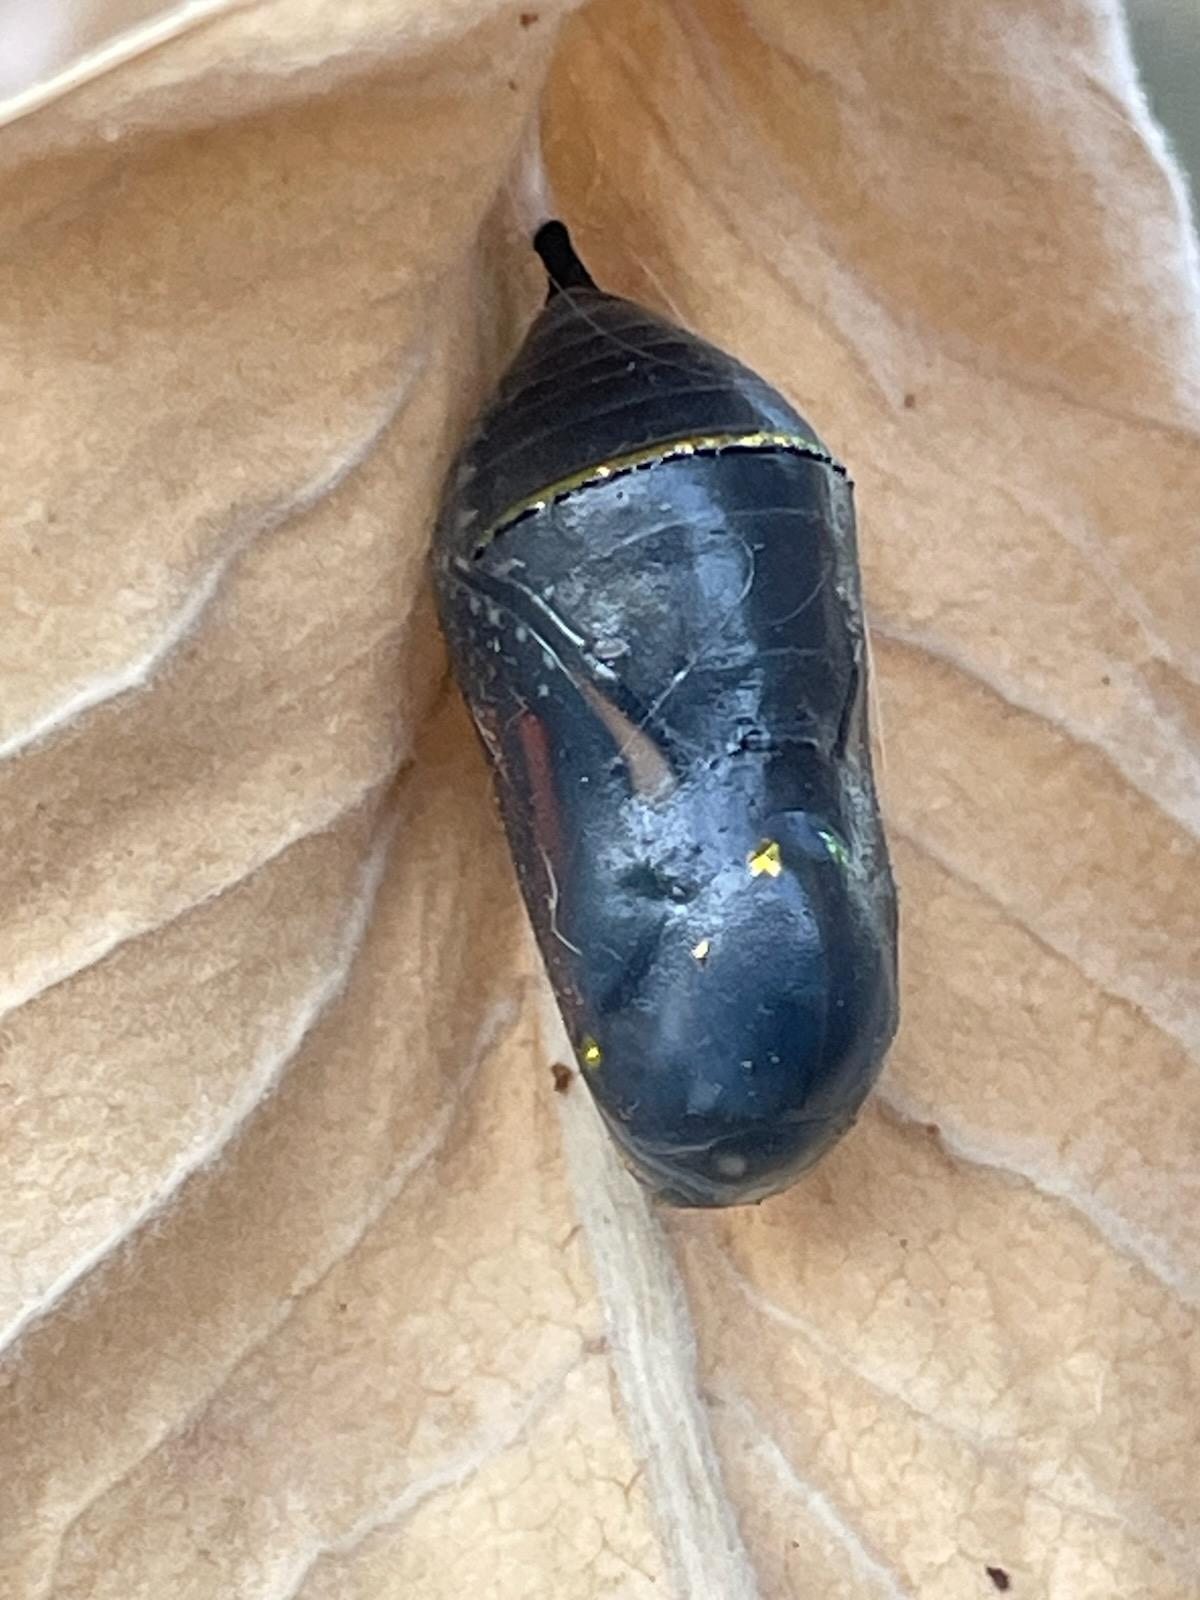 on the side of the all black chrysalis you can see the orange wing with black wing veins and white dots